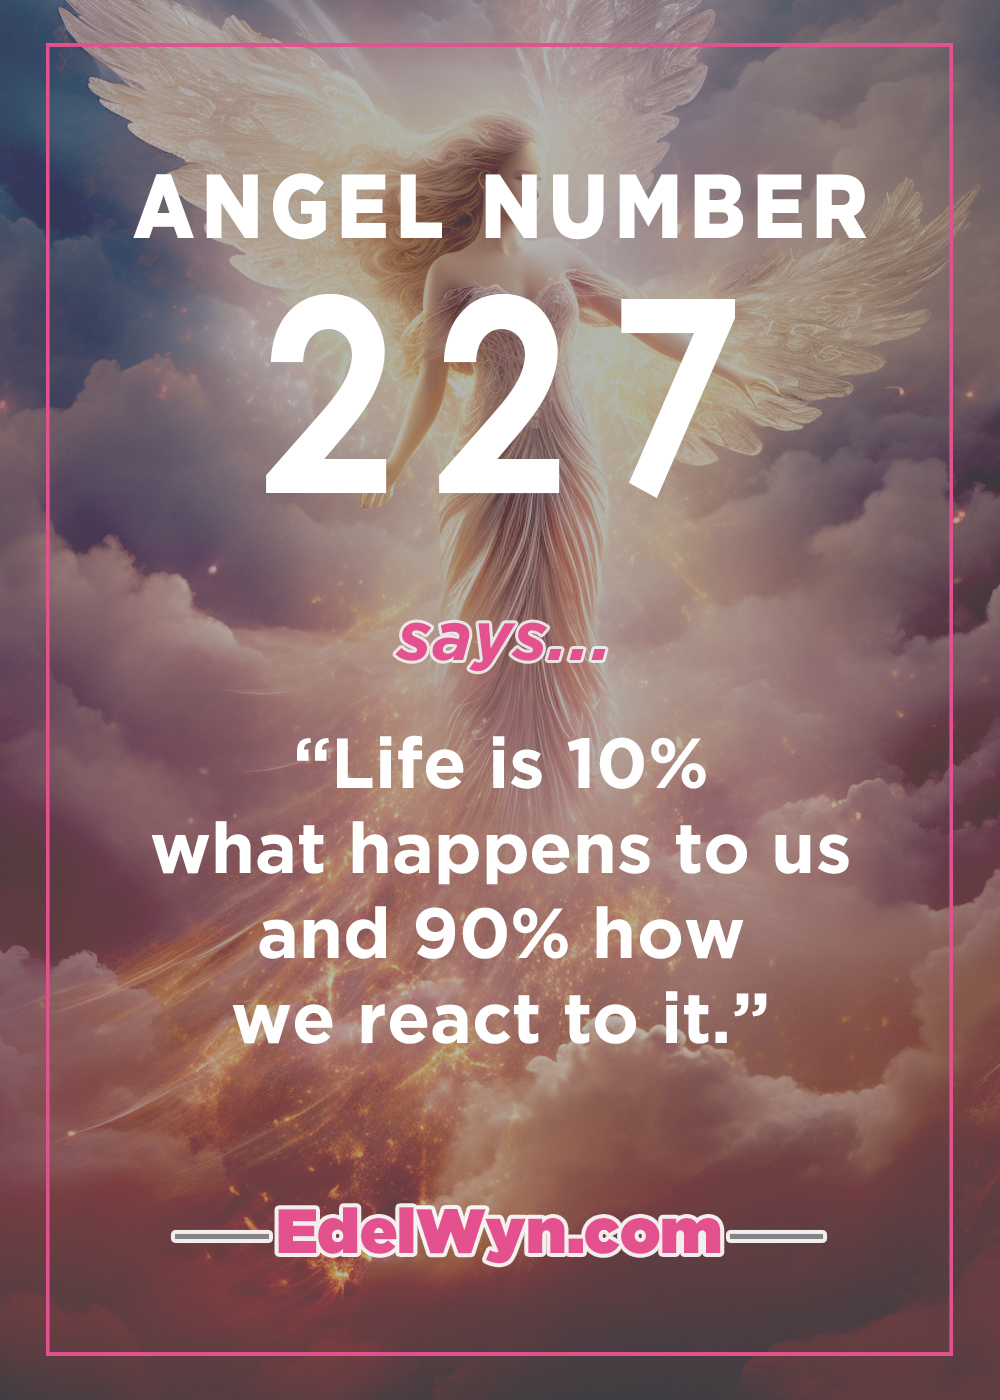 227 Angel Number Invites Light Into Your Life. Find Out Why…